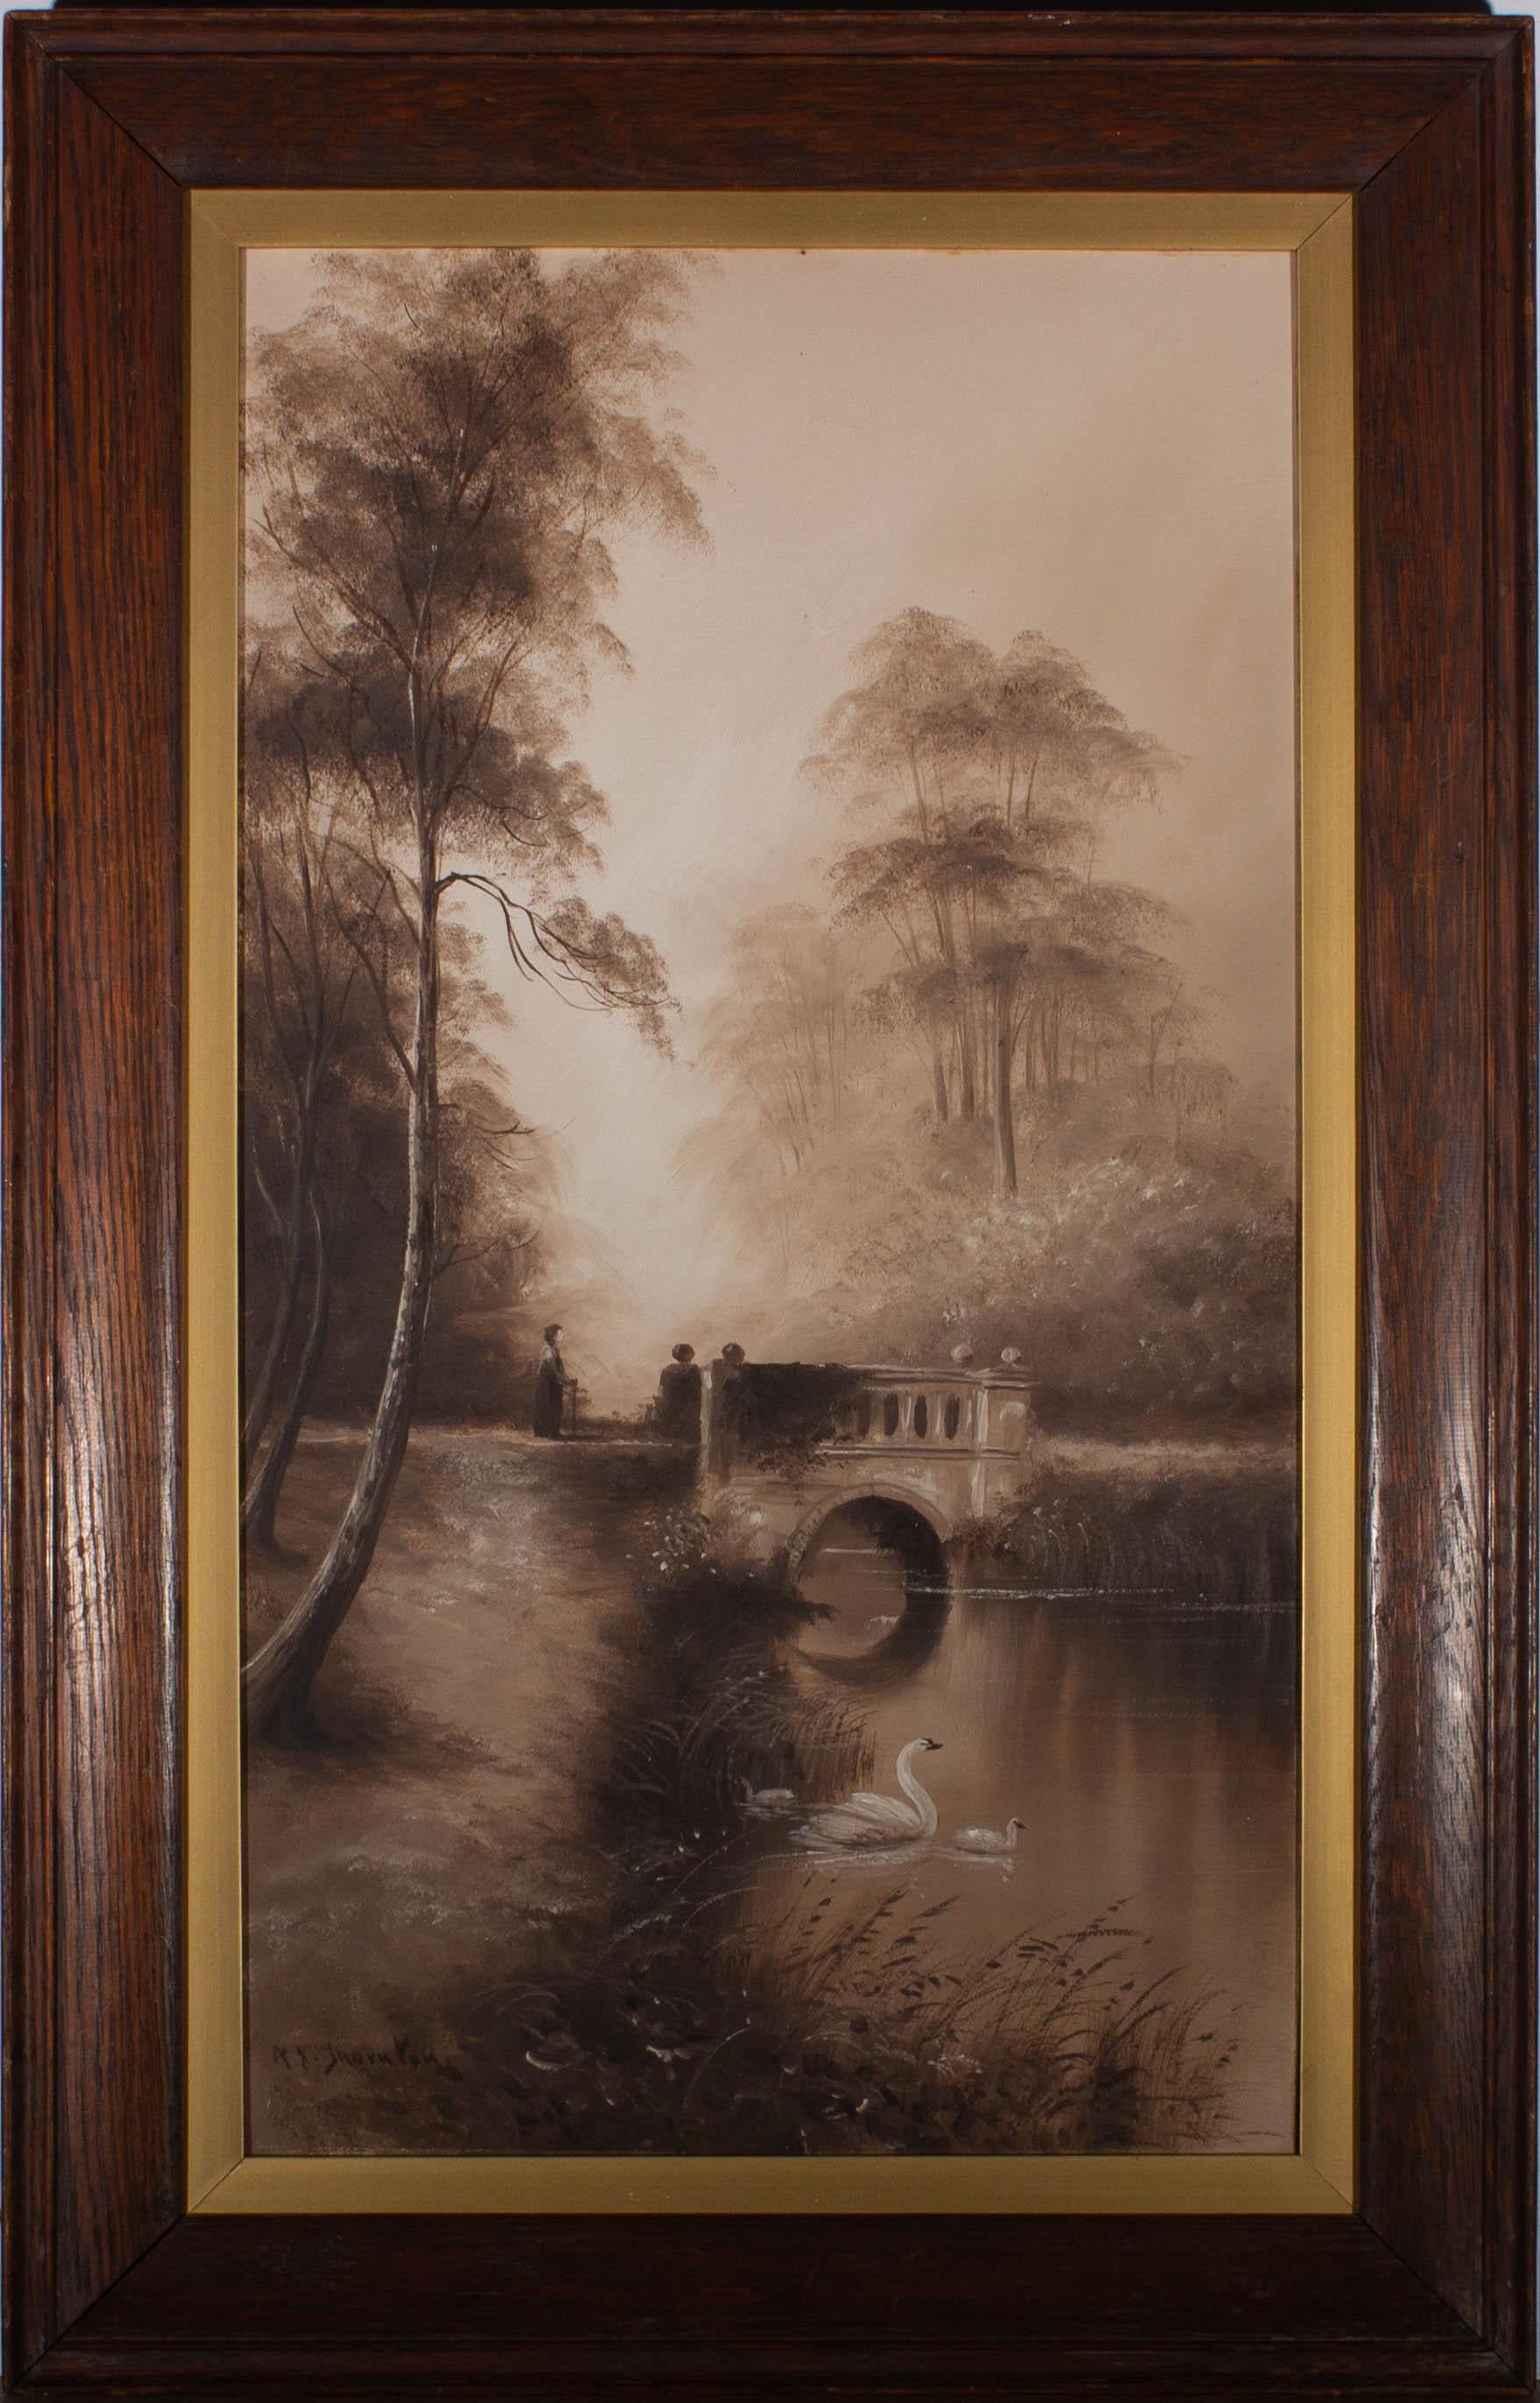 Depicting a swan and her two goslings on a peaceful river. In the background an elderly woman passes of the quaint stone bridge surrounded by tall, elegant trees. Signed to the lower right. Well presented in original oak frame. On board.
